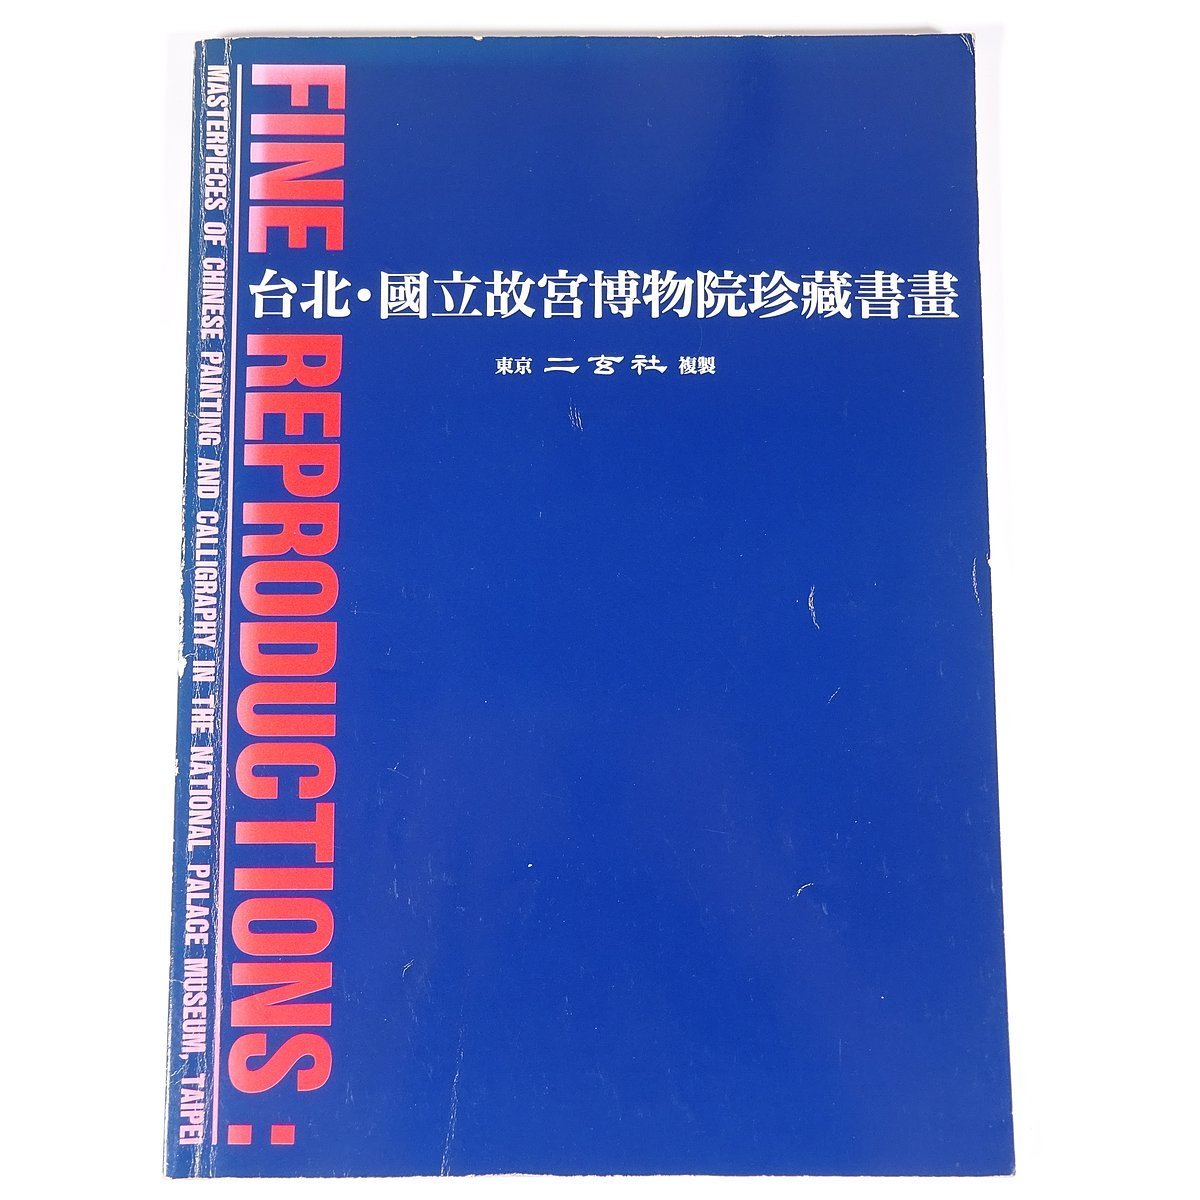 [Chinese/English books] Taipei, National Palace Museum, rare paintings and calligraphy, Tokyo, Nigensha, reproductions, large-format books, illustrations, catalogs, art, fine art, paintings, Chinese paintings, calligraphy, Painting, Art Book, Collection, Catalog